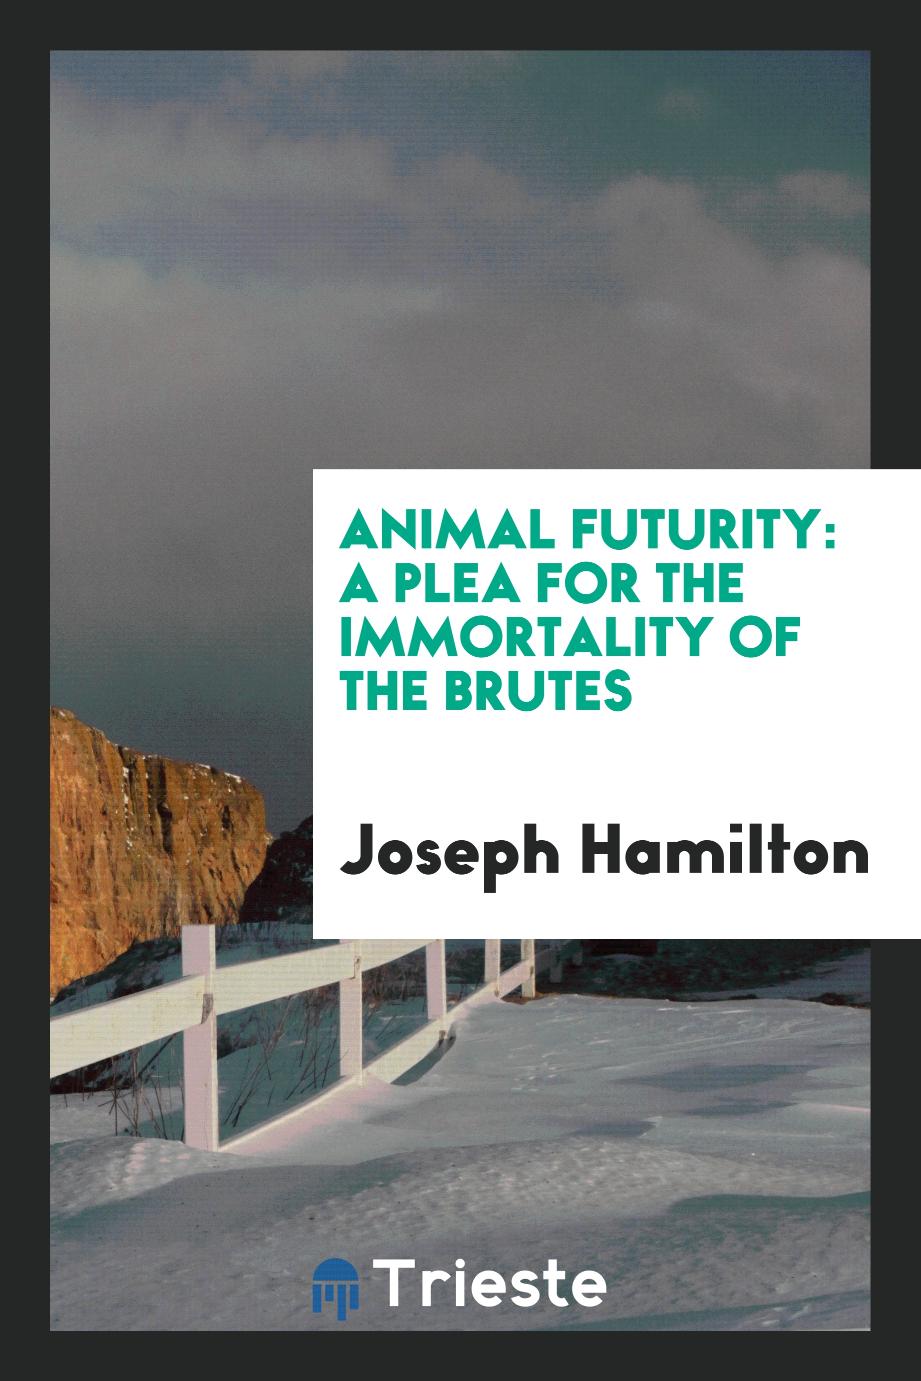 Animal Futurity: A Plea for the Immortality of the Brutes